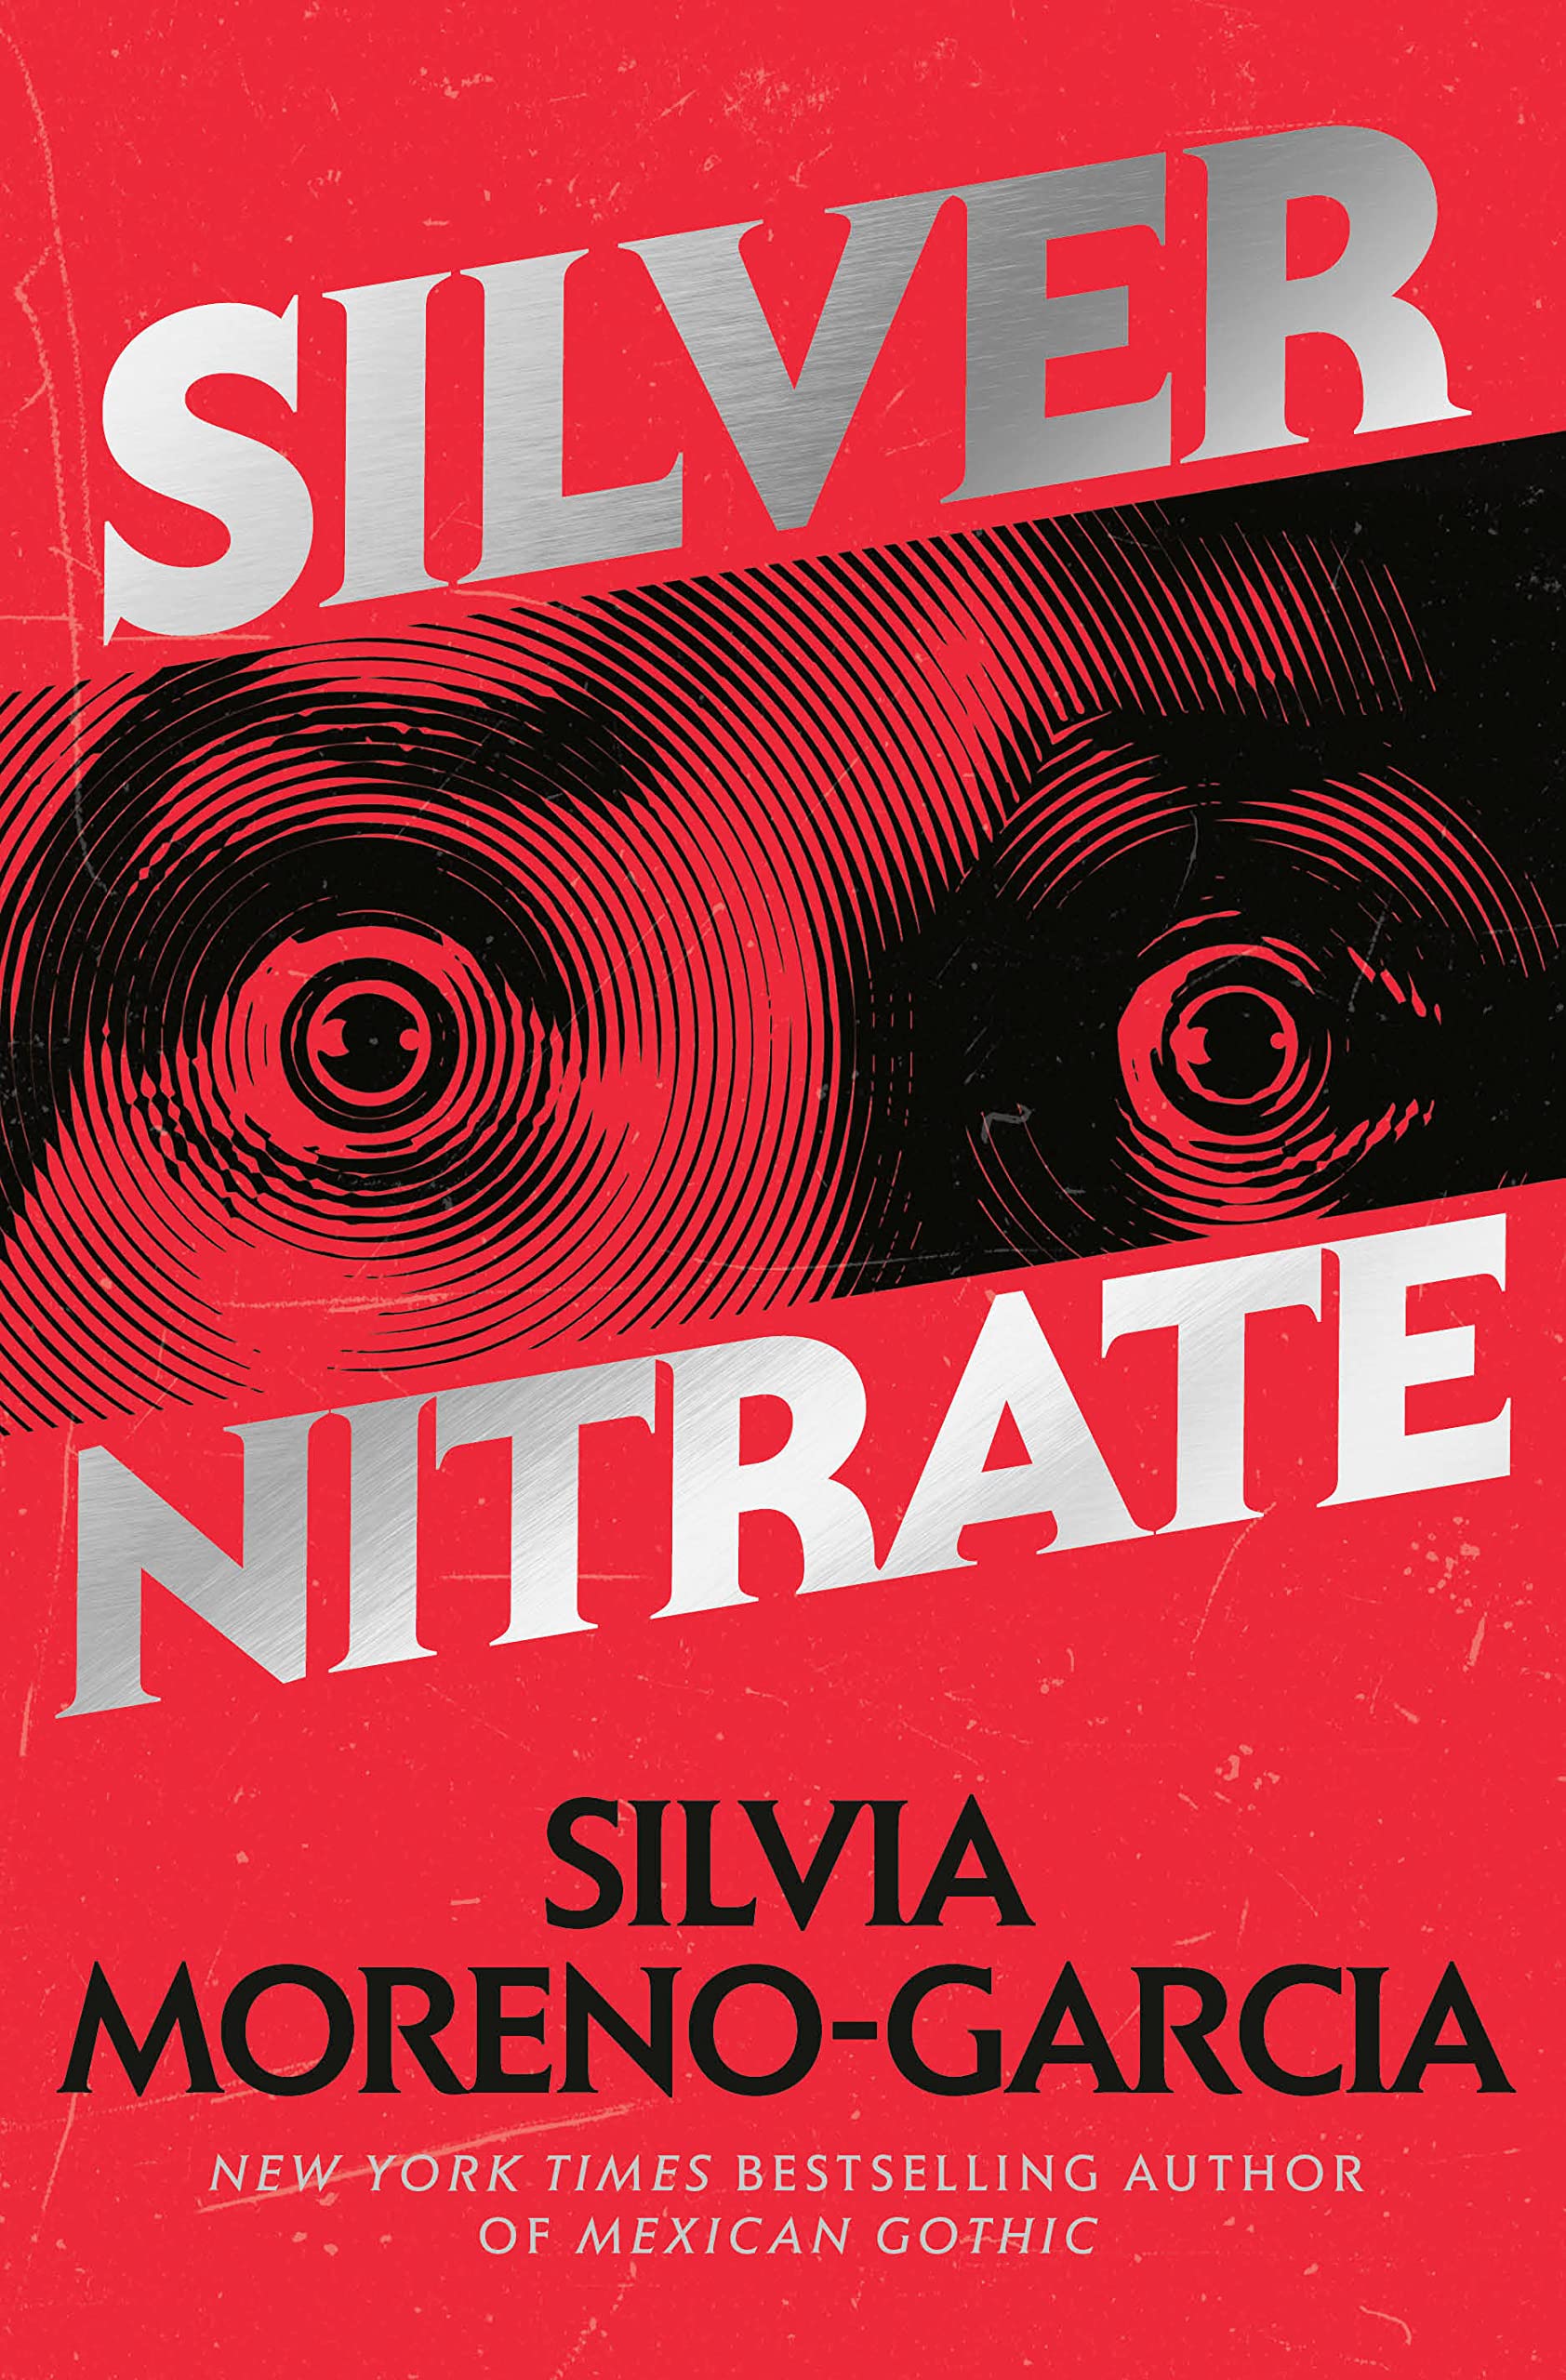 Image for "Silver Nitrate"